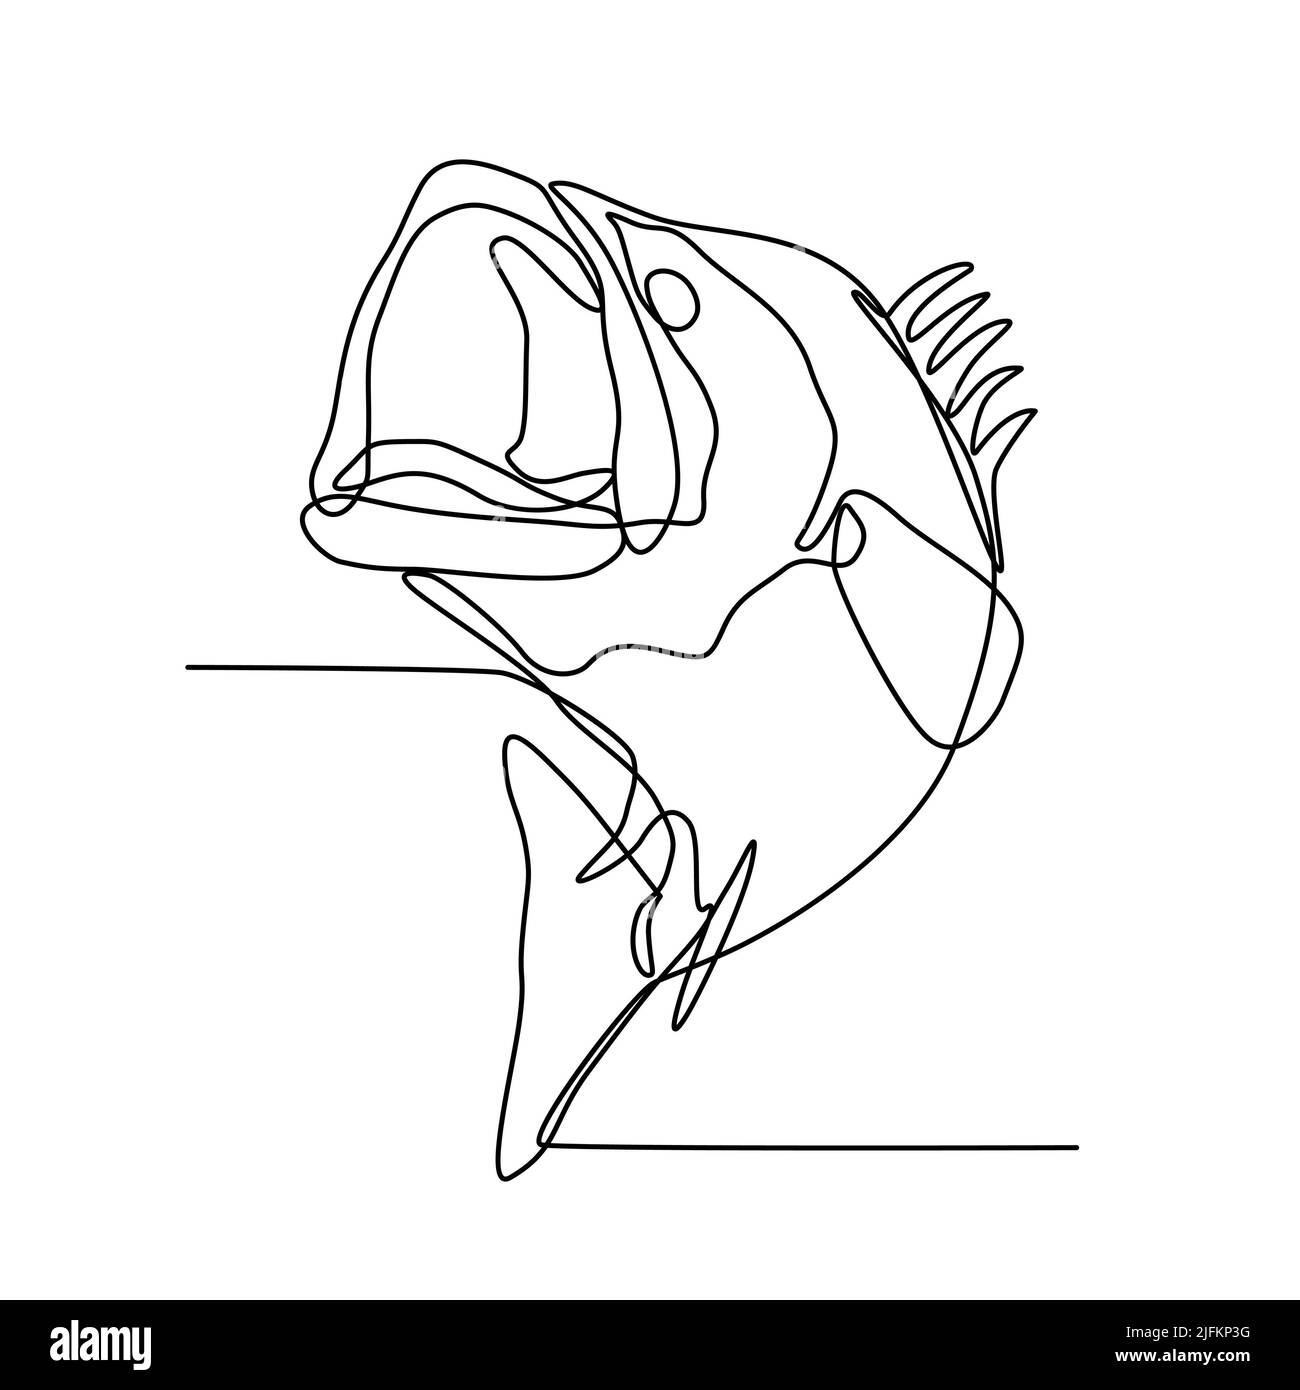 Continuous line illustration of largemouth bass, freshwater gamefish that is a species of black bass native to North America, jumping up done in Stock Photo